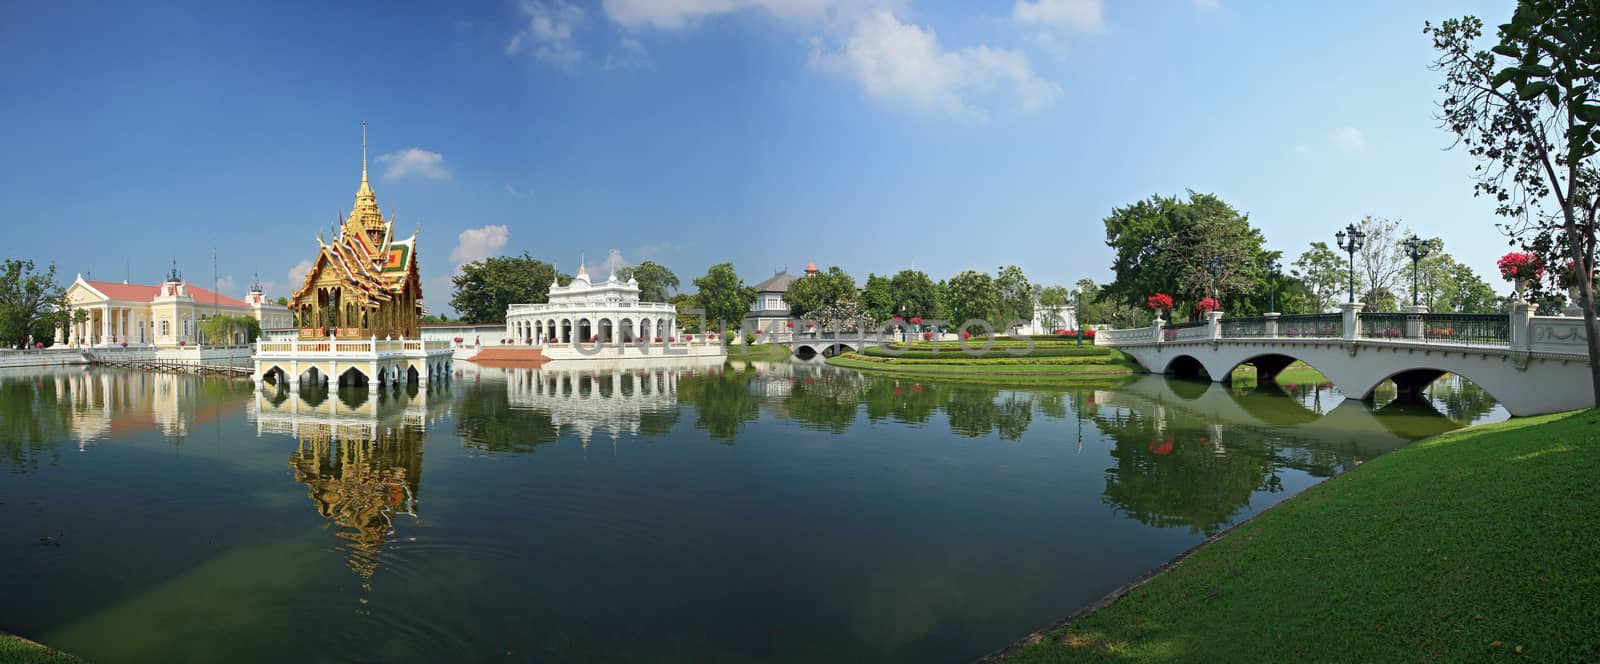 panoramic view of Bang Pa-In Palace in Thailand. by think4photop